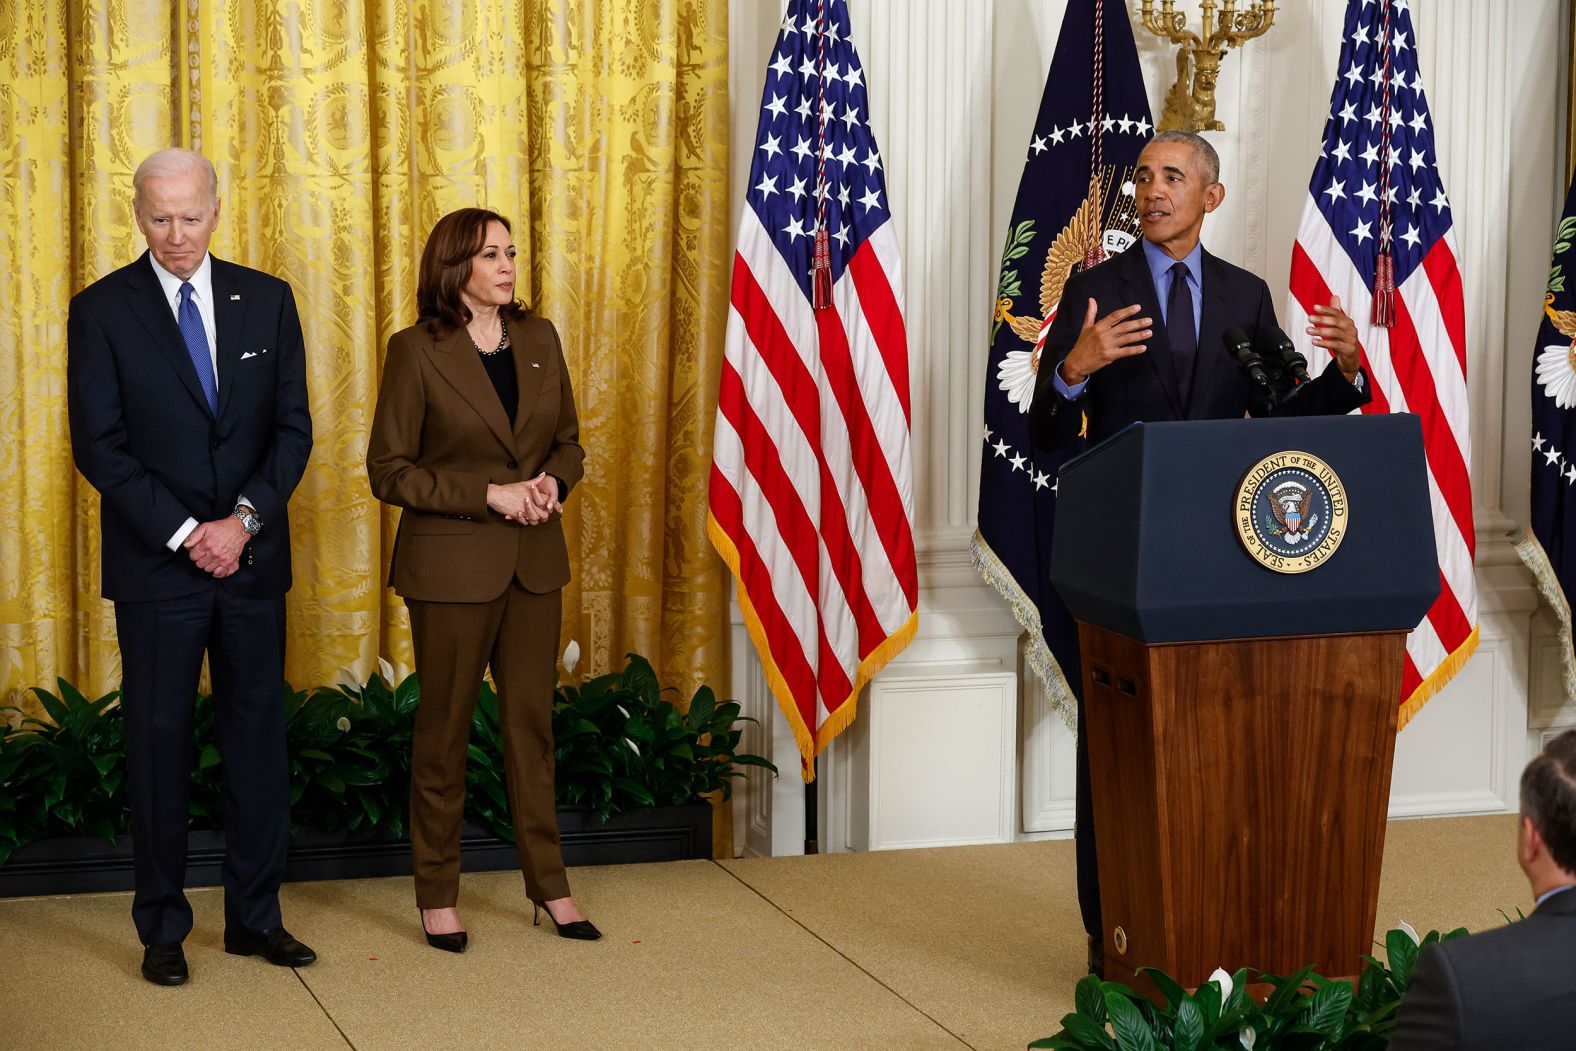 Obama delivers remarks from the East Room of the White House as Biden and Vice President Kamala Harris look on.